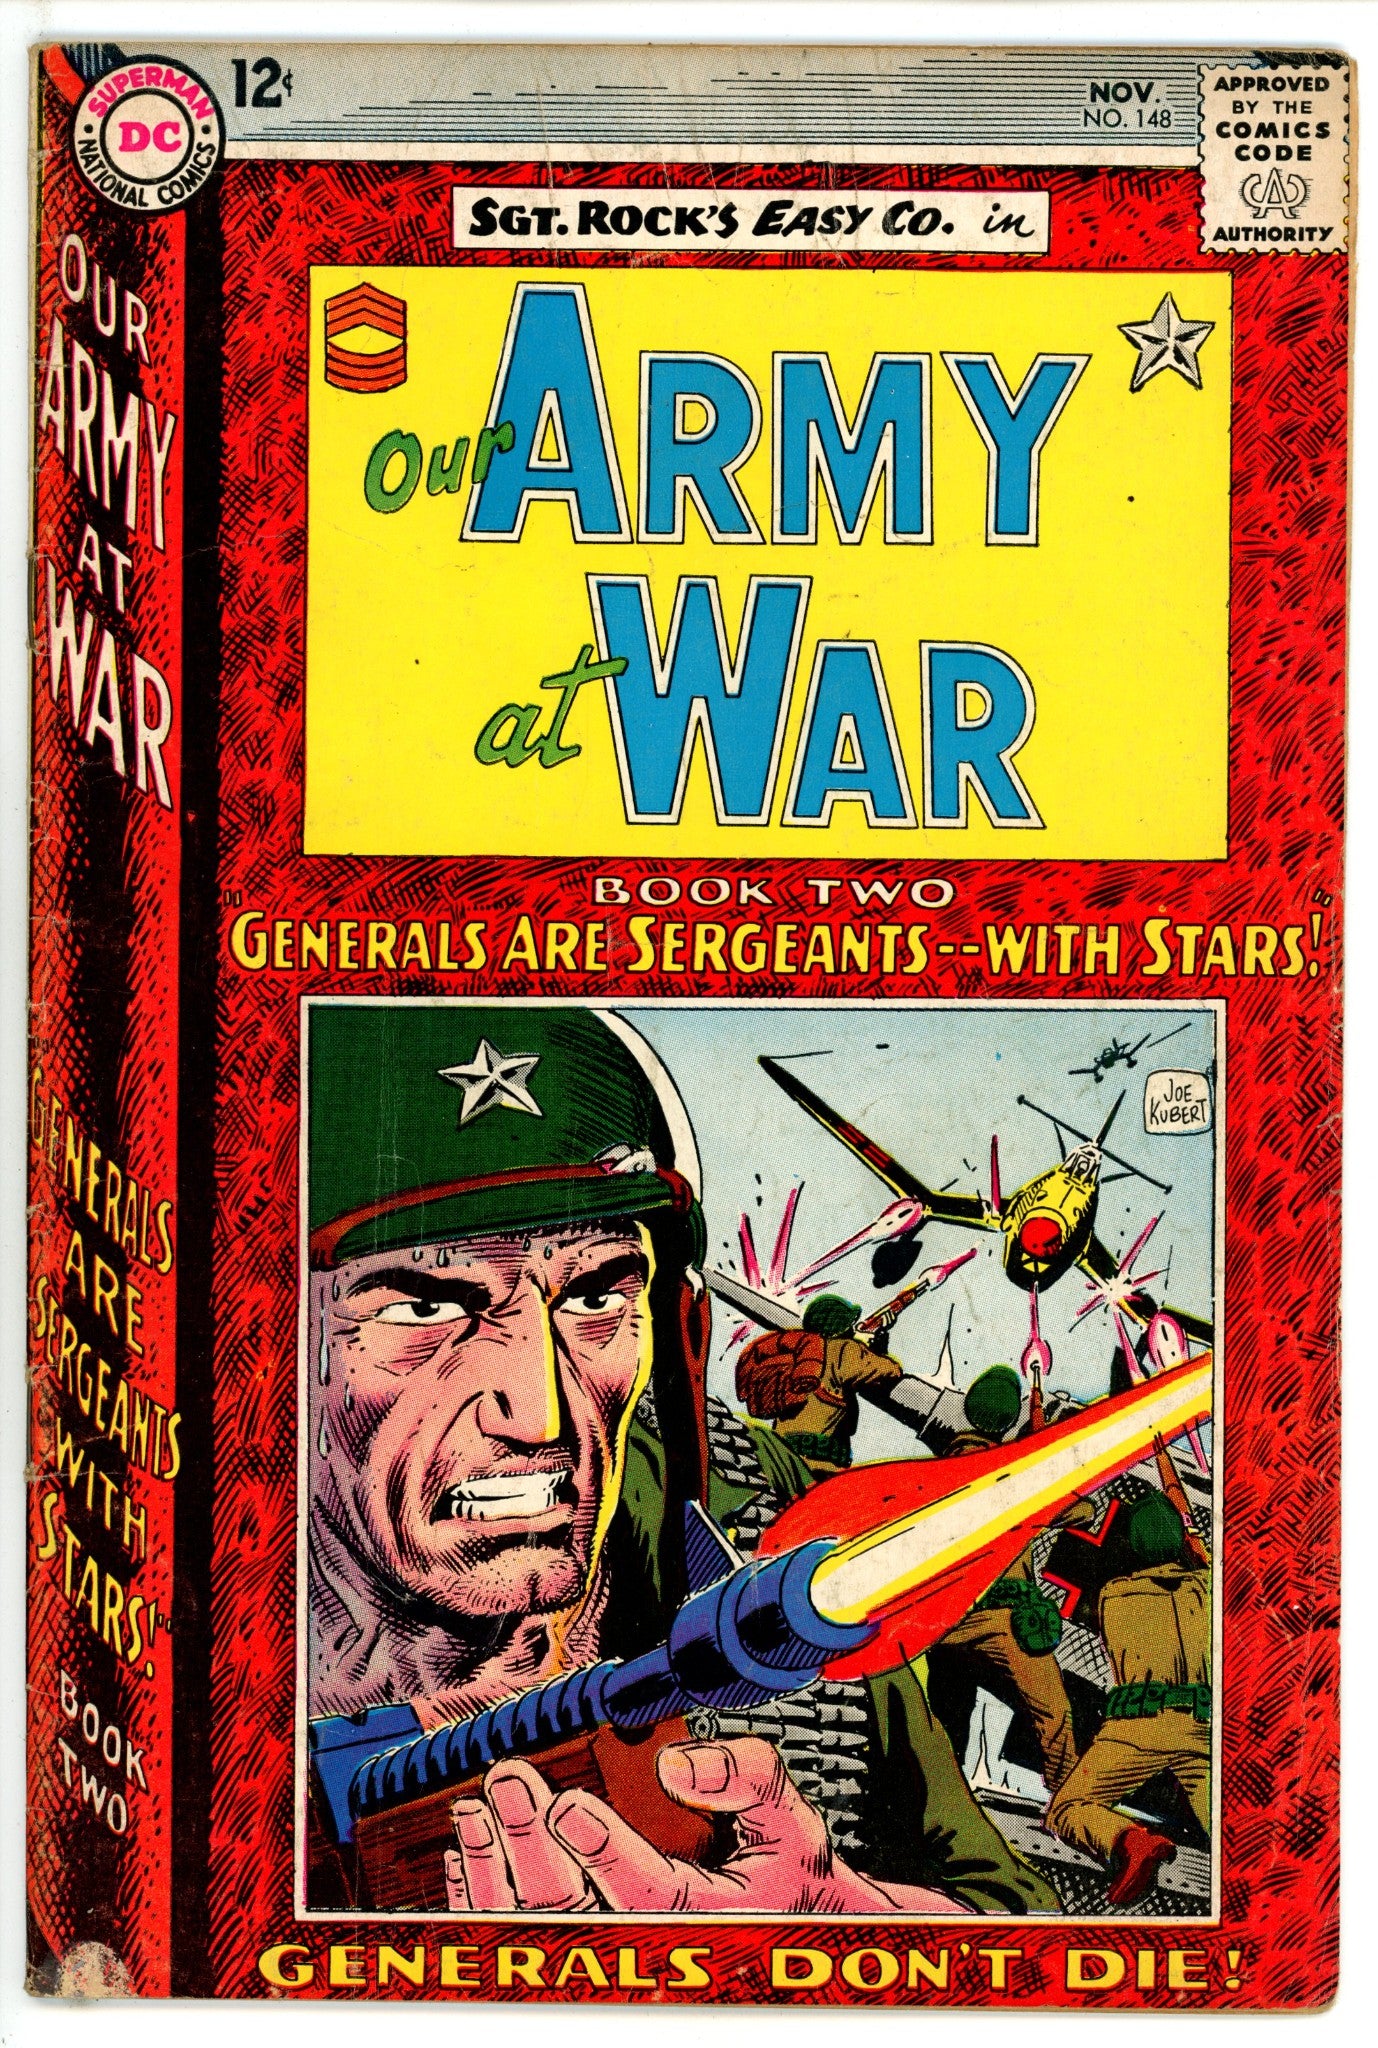 Our Army at War Vol 1 148 VG (4.0) (1964) 